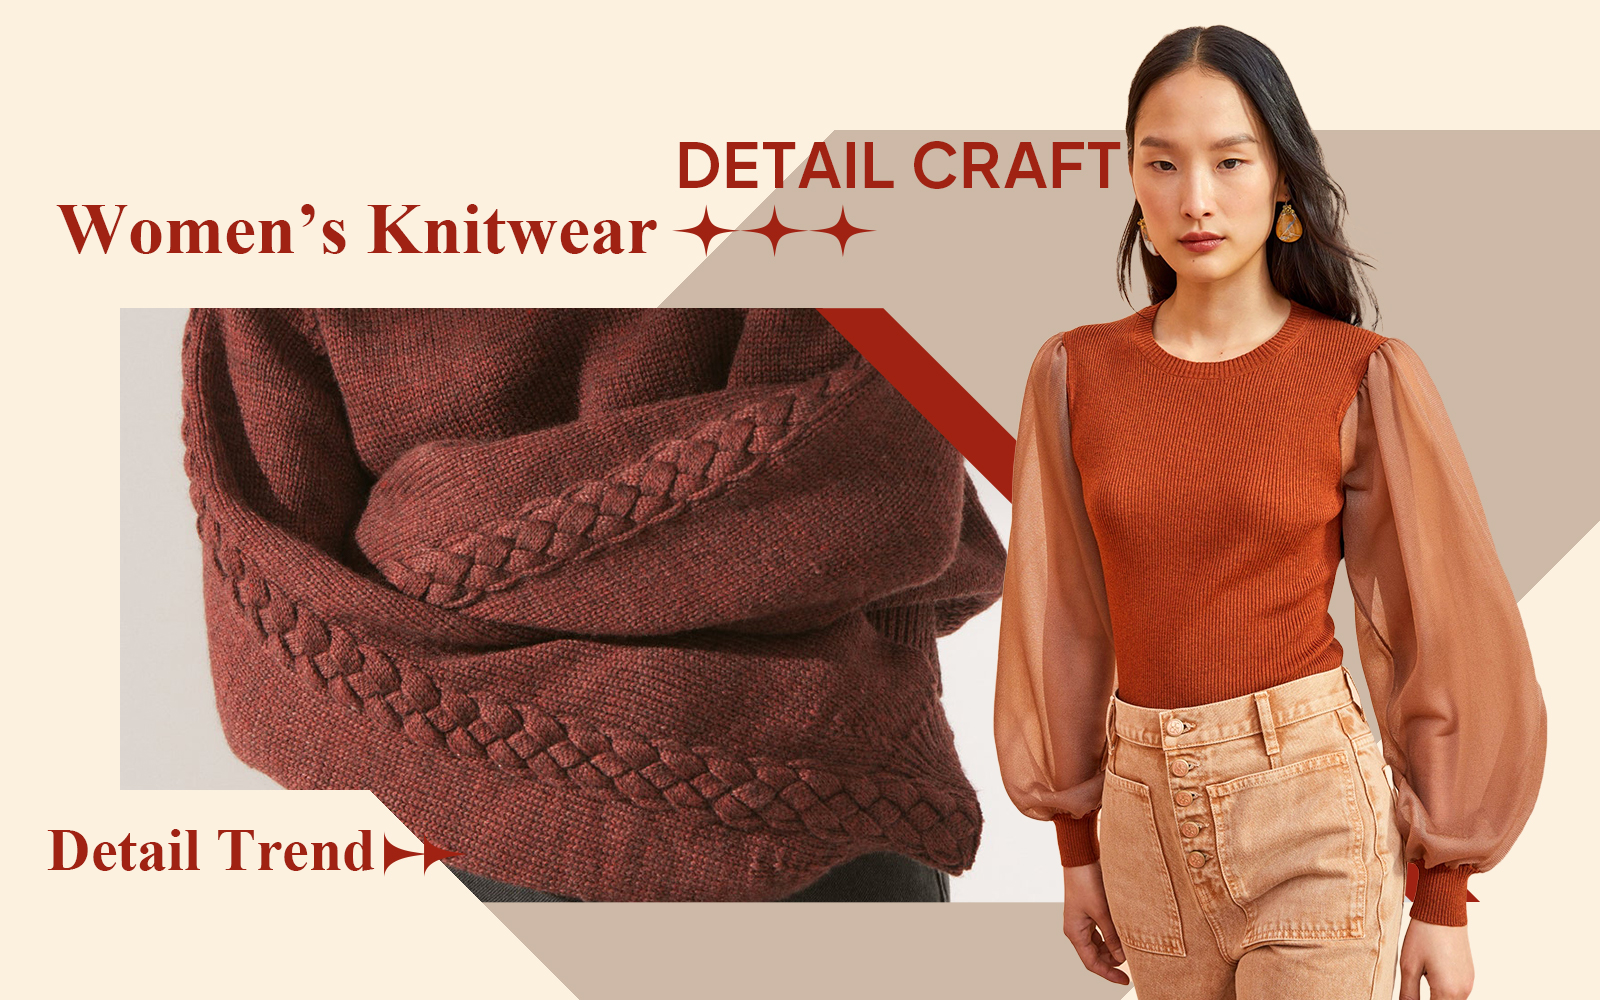 Mature & Elegant -- The Detail & Craft Trend for Women's Knitwear